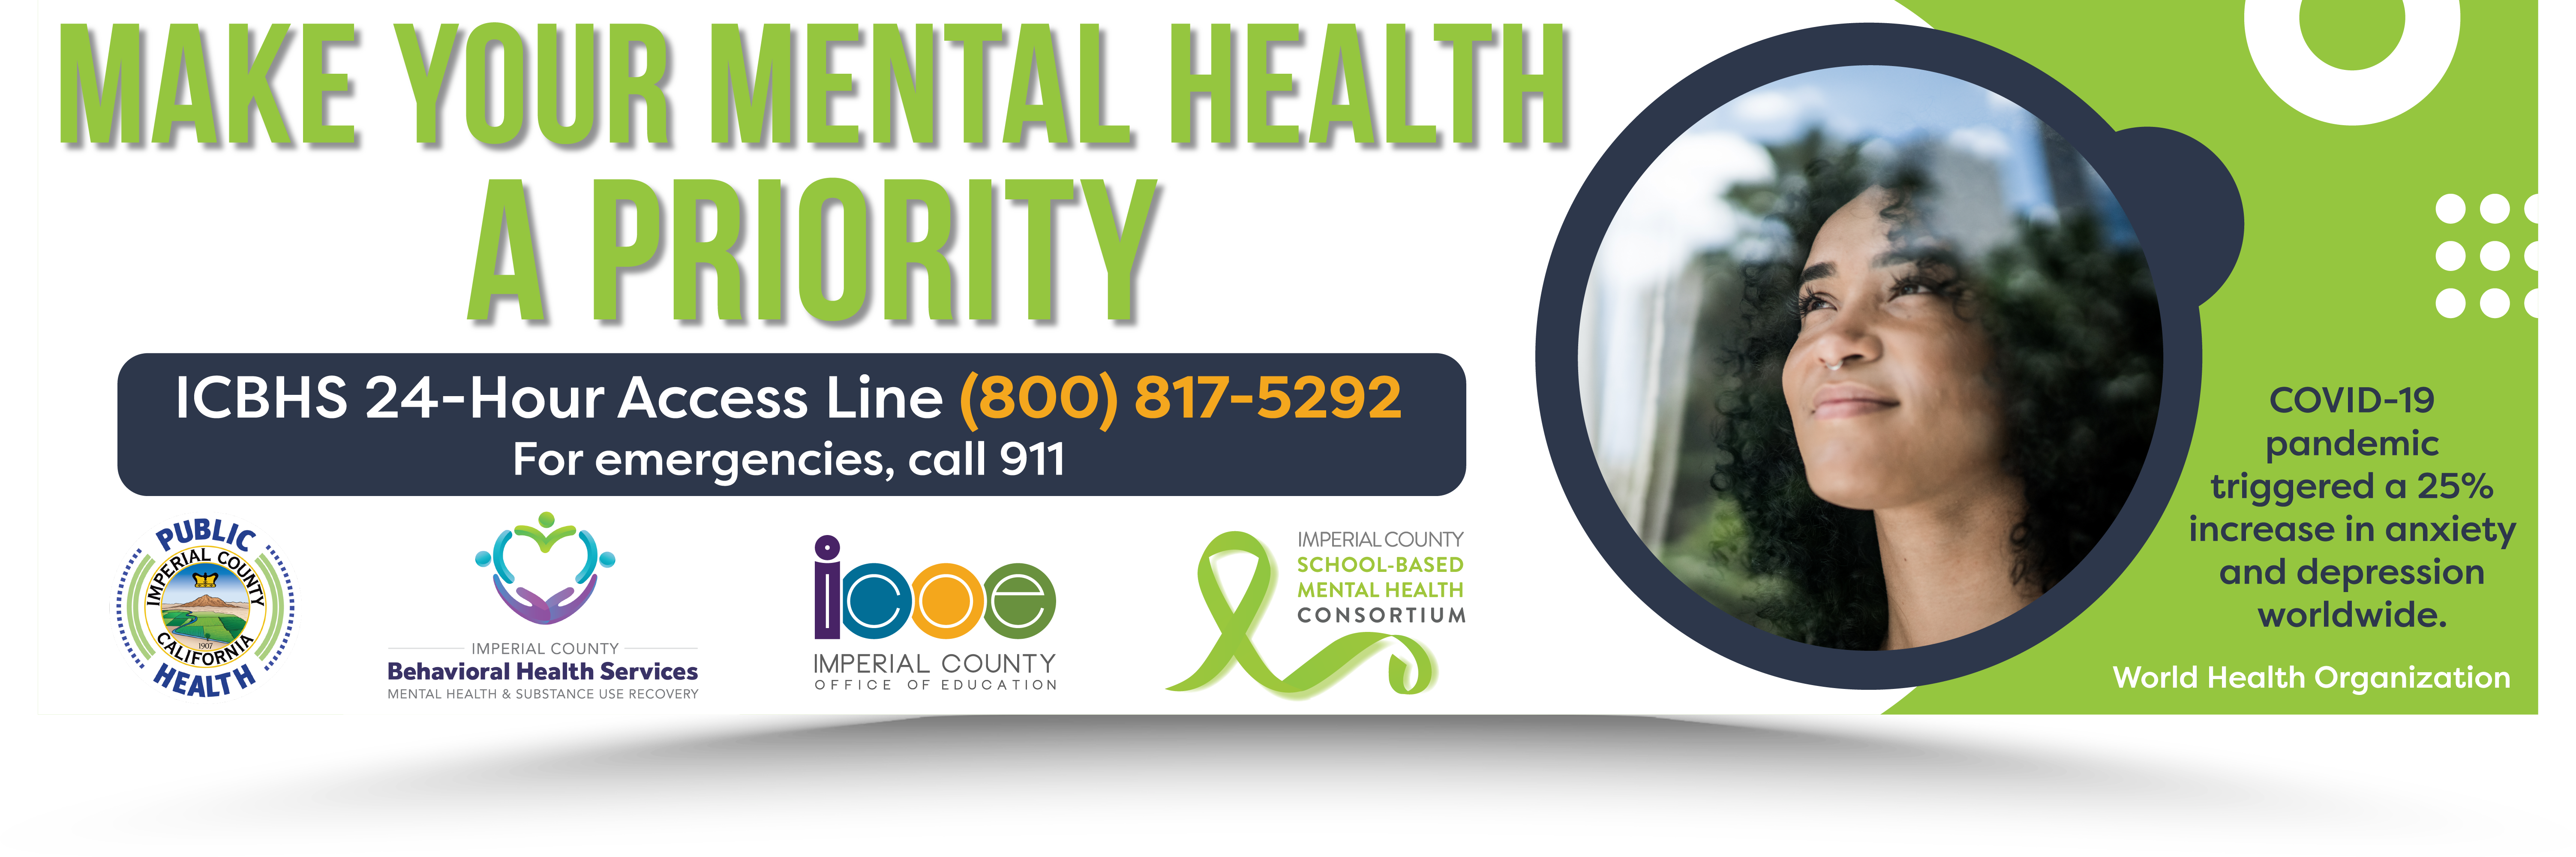 Make Your Mental Health A Priority Poster Banner